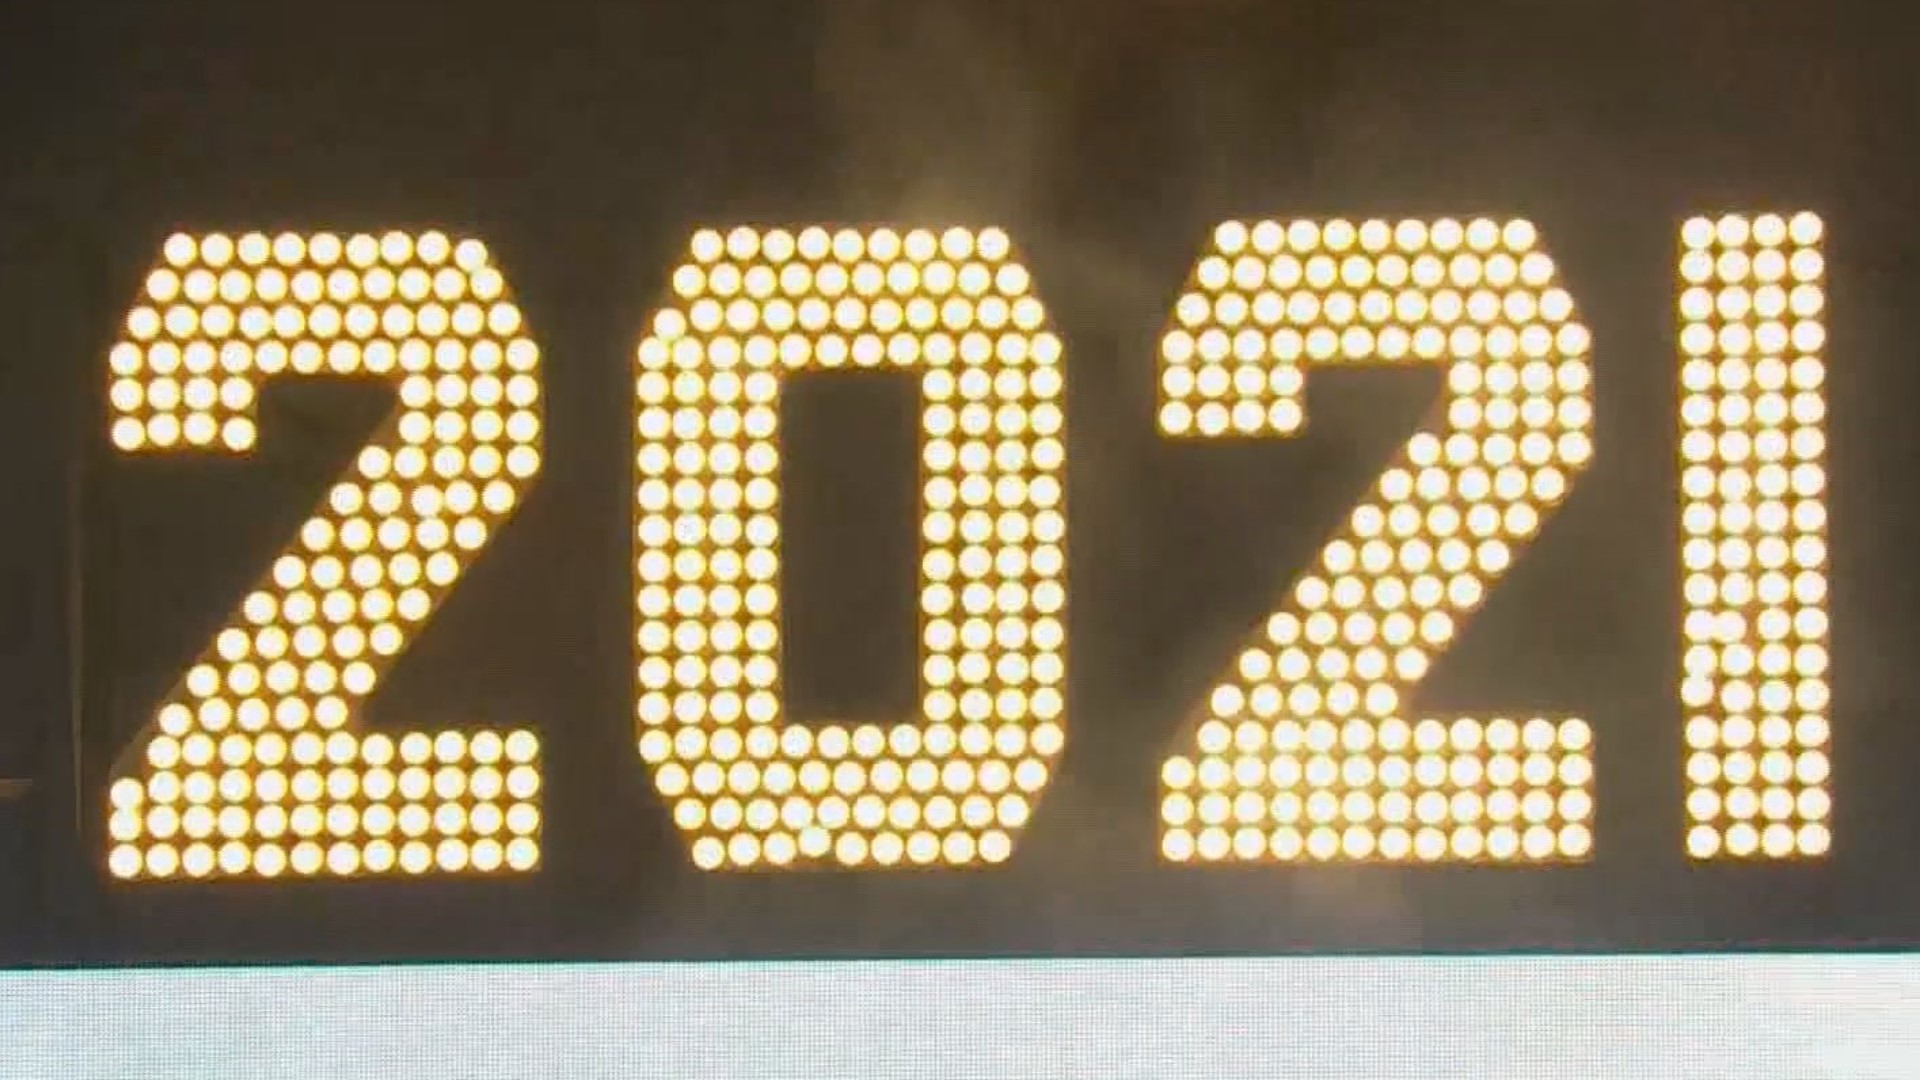 The famous Times Square Ball drop in New York City officially signaled the start of 2021